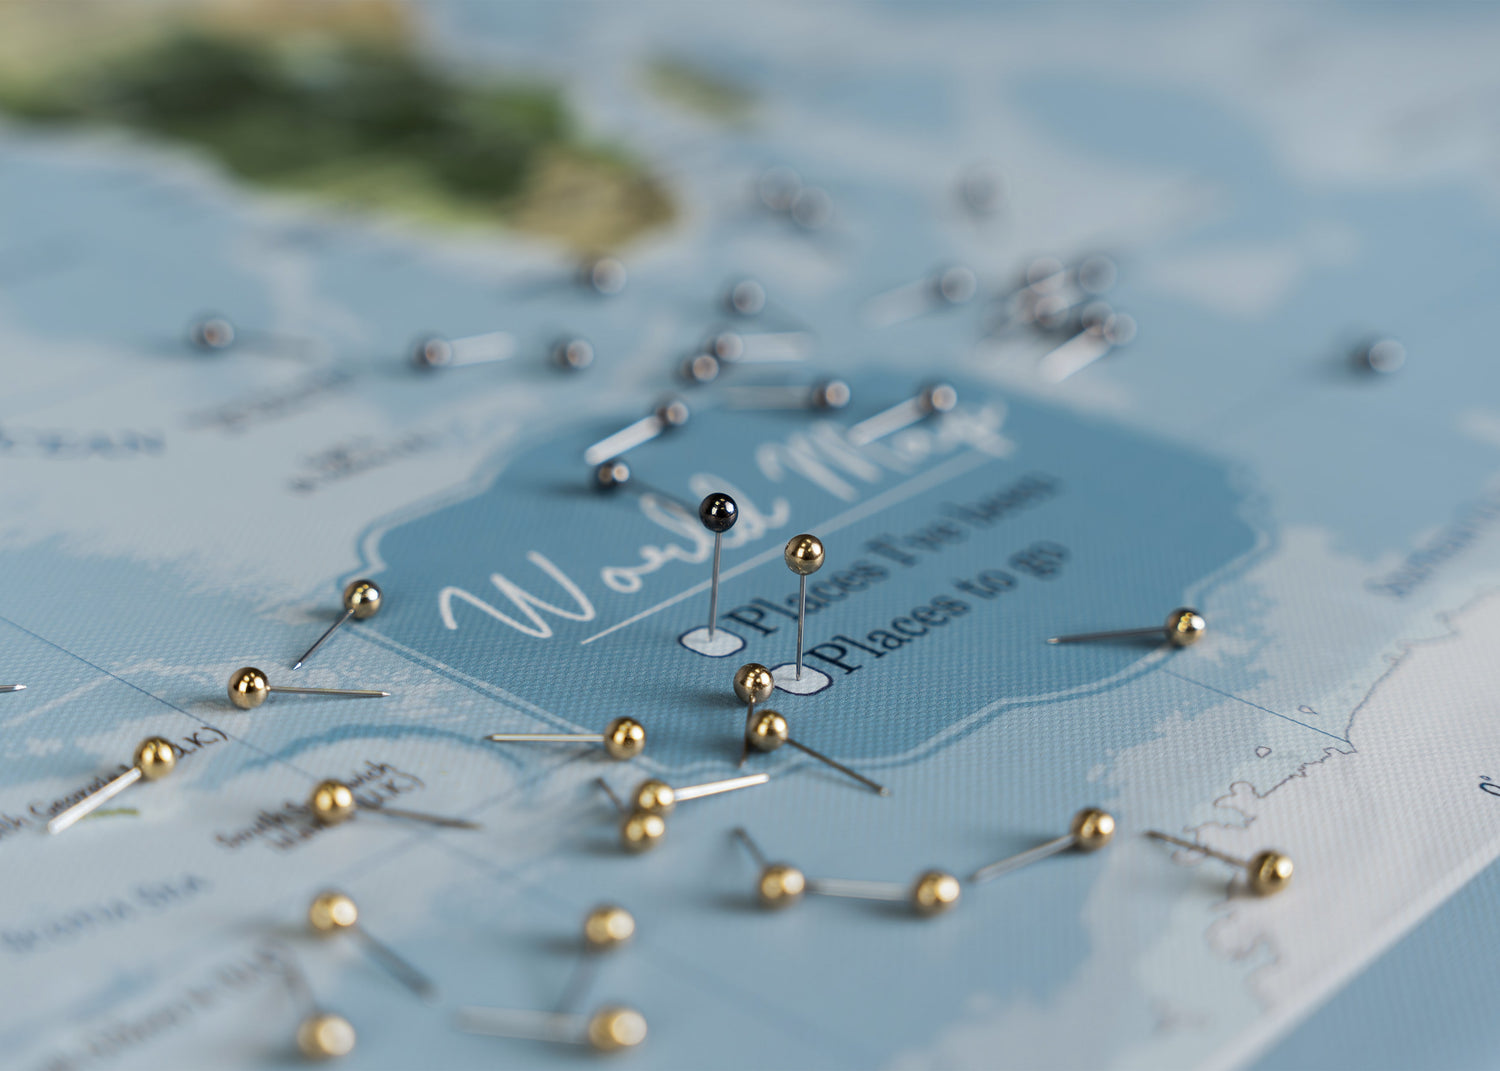 Close-up of a light blue world map pinboard with gold and black pins highlighting travel destinations, an inspiring gift for travelers to capture their journeys and plan future explorations.